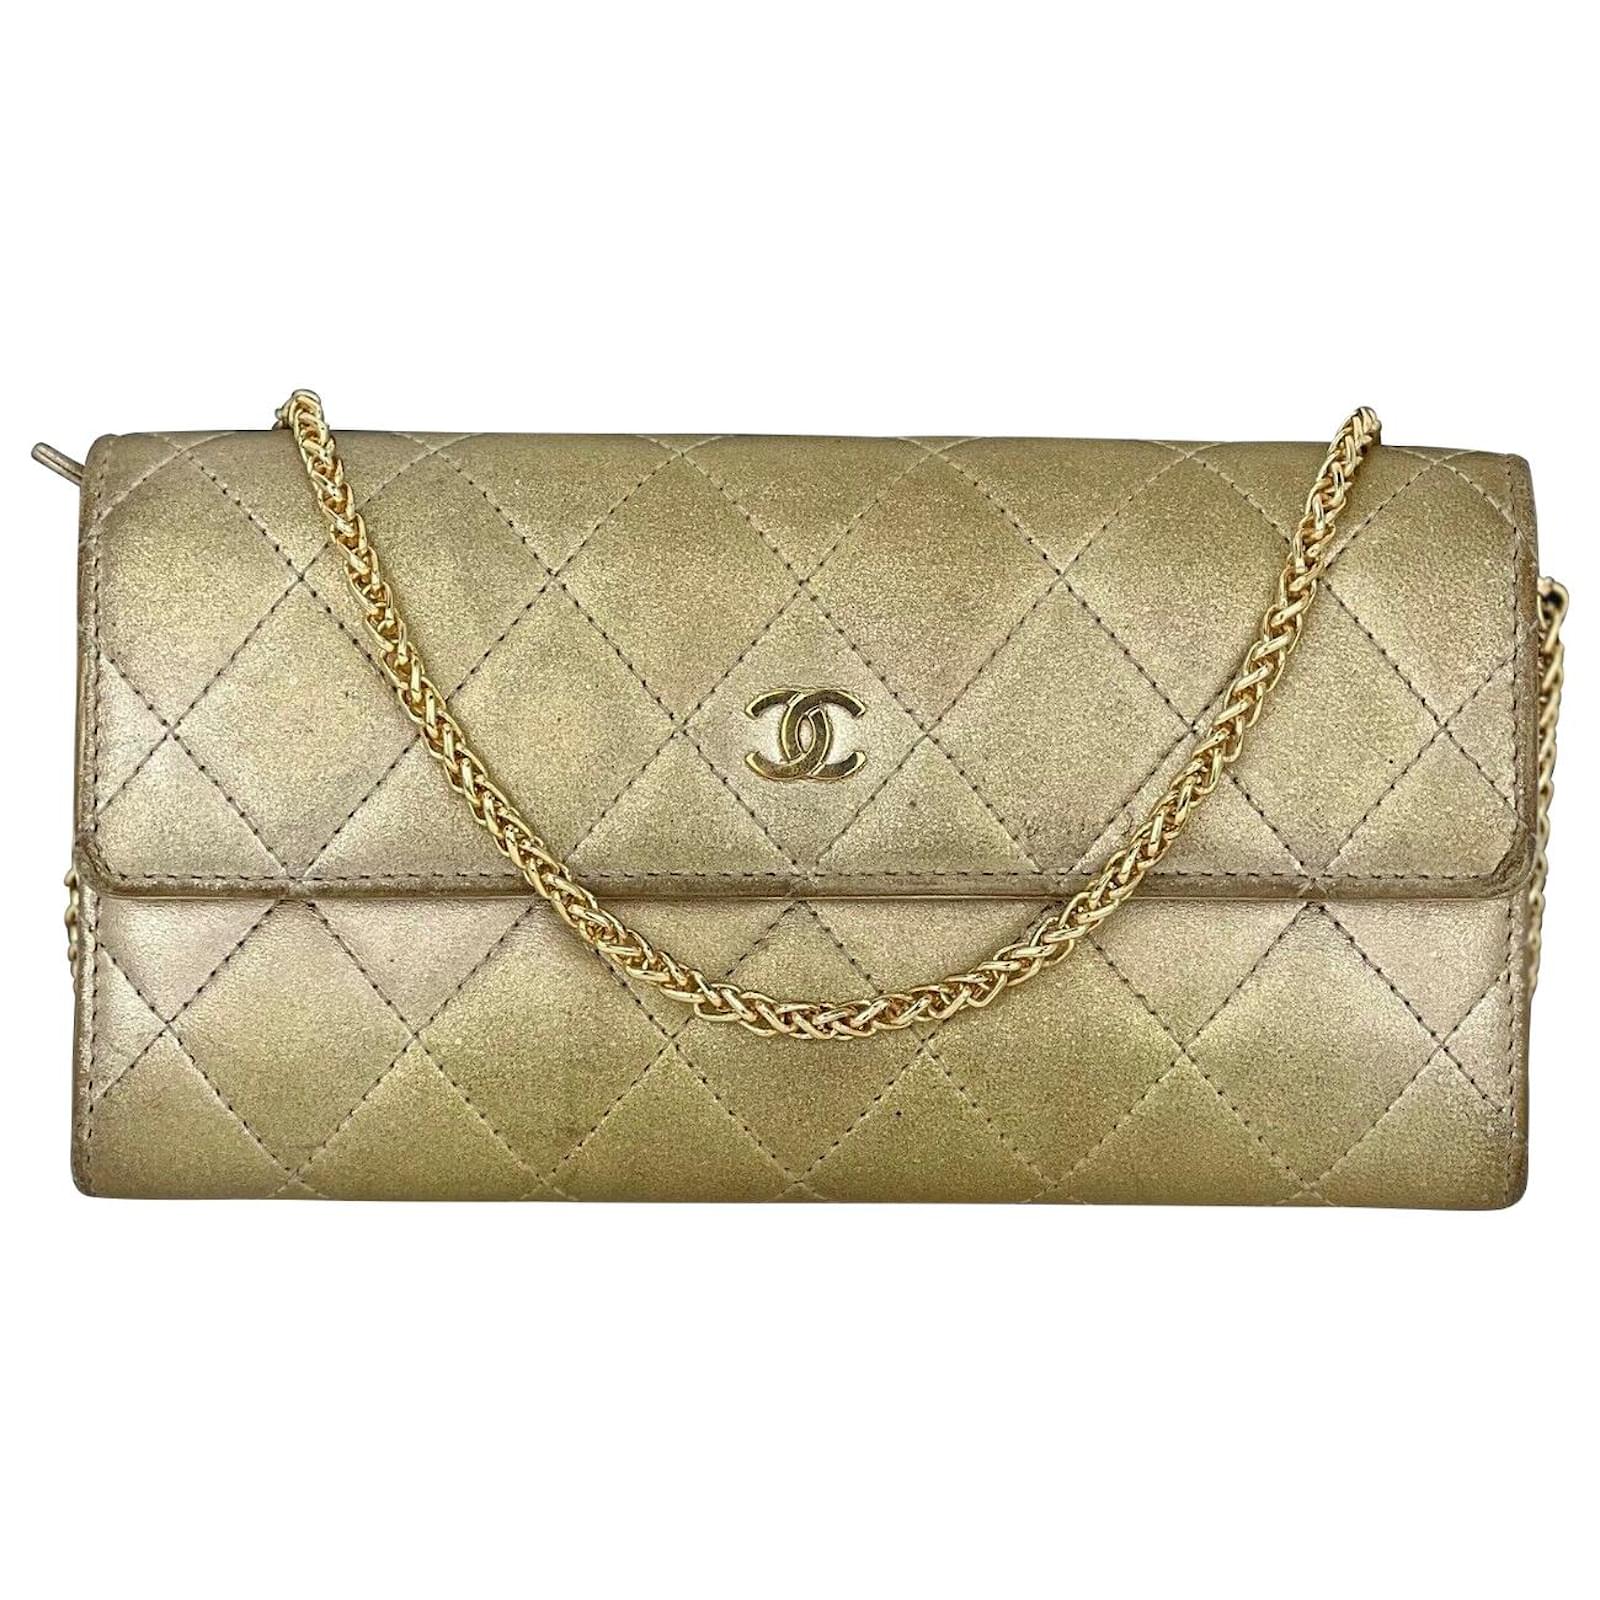 Chanel Wallet Large Gusset Flap Metallic Gold Quilted Lambskin